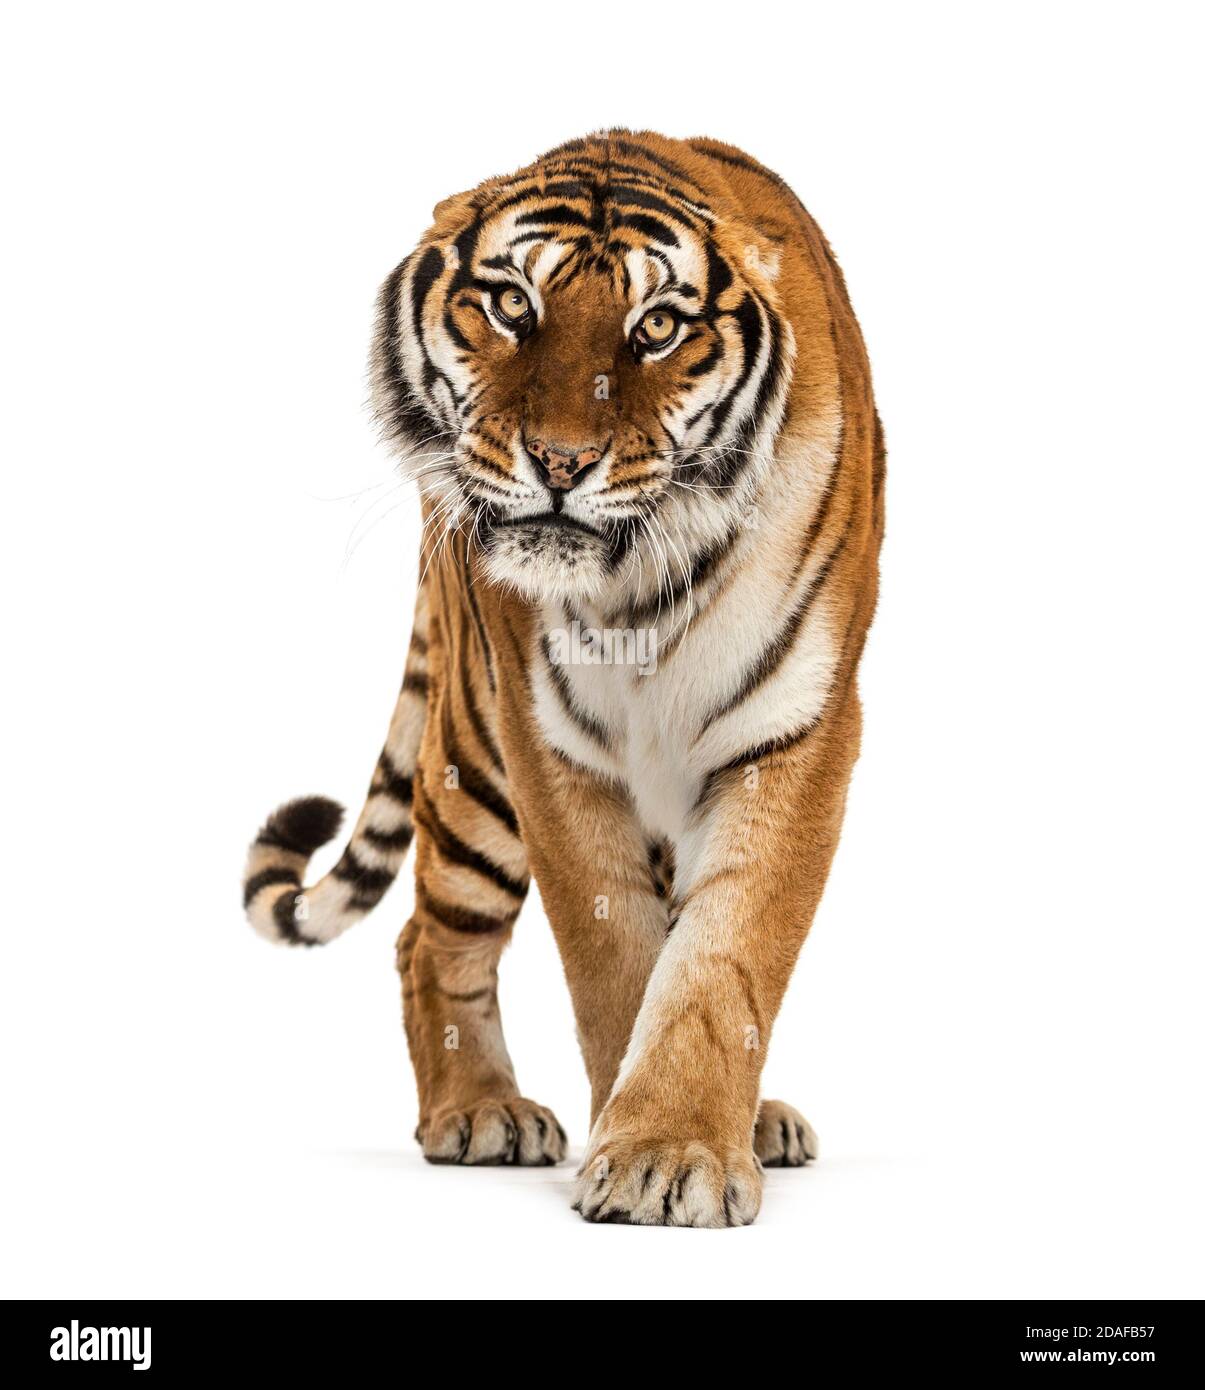 Tiger prowling and approaching, isolated Stock Photo